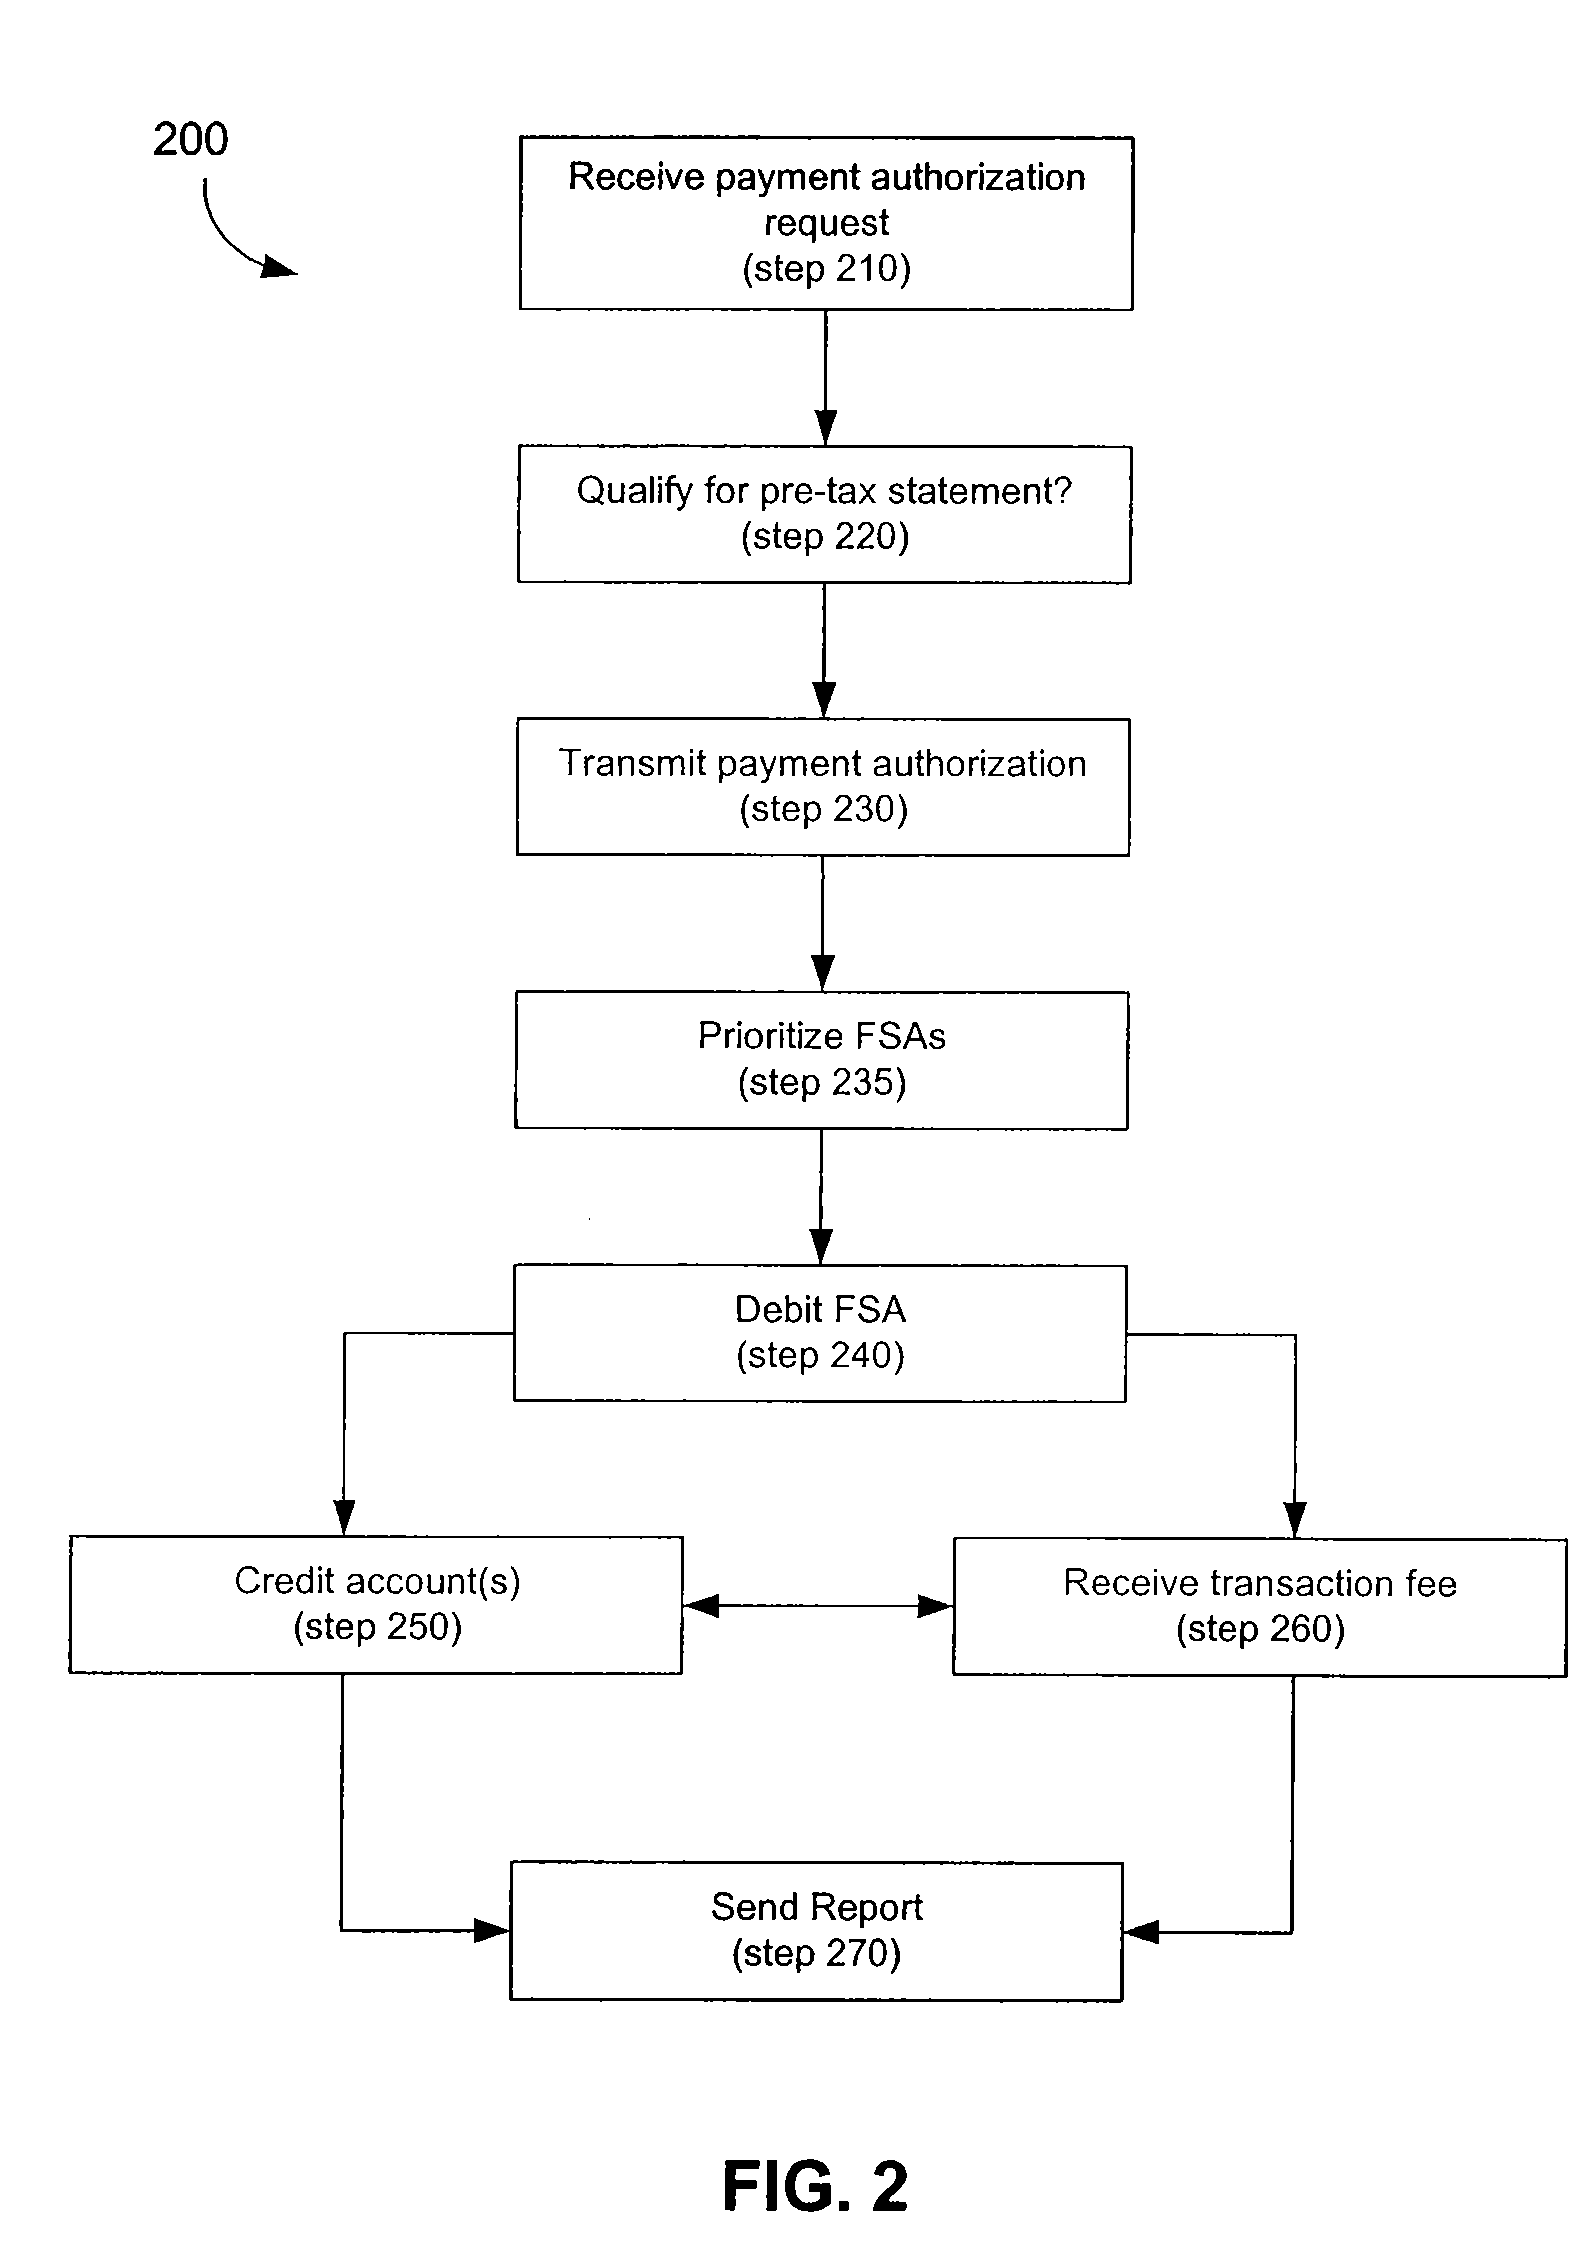 Spending Account Systems and Methods